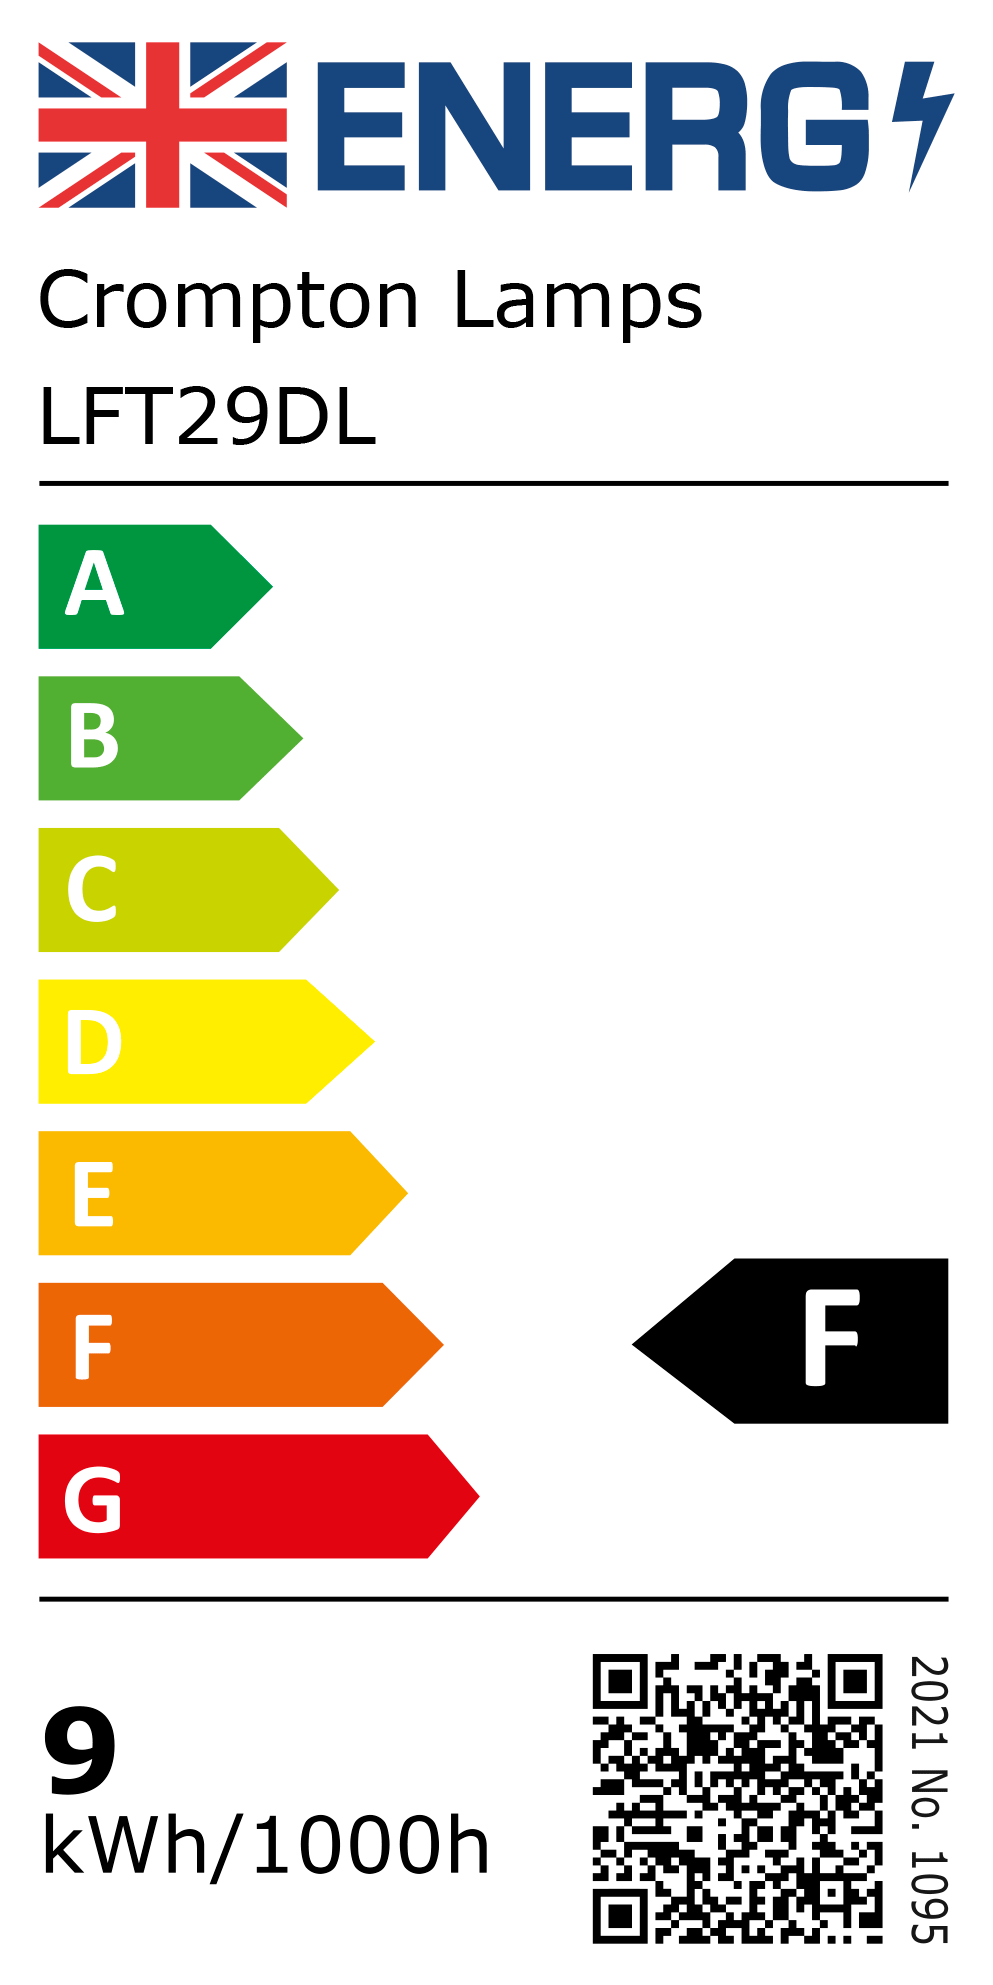 New 2021 Energy Rating Label: Stock Code LFT29DL